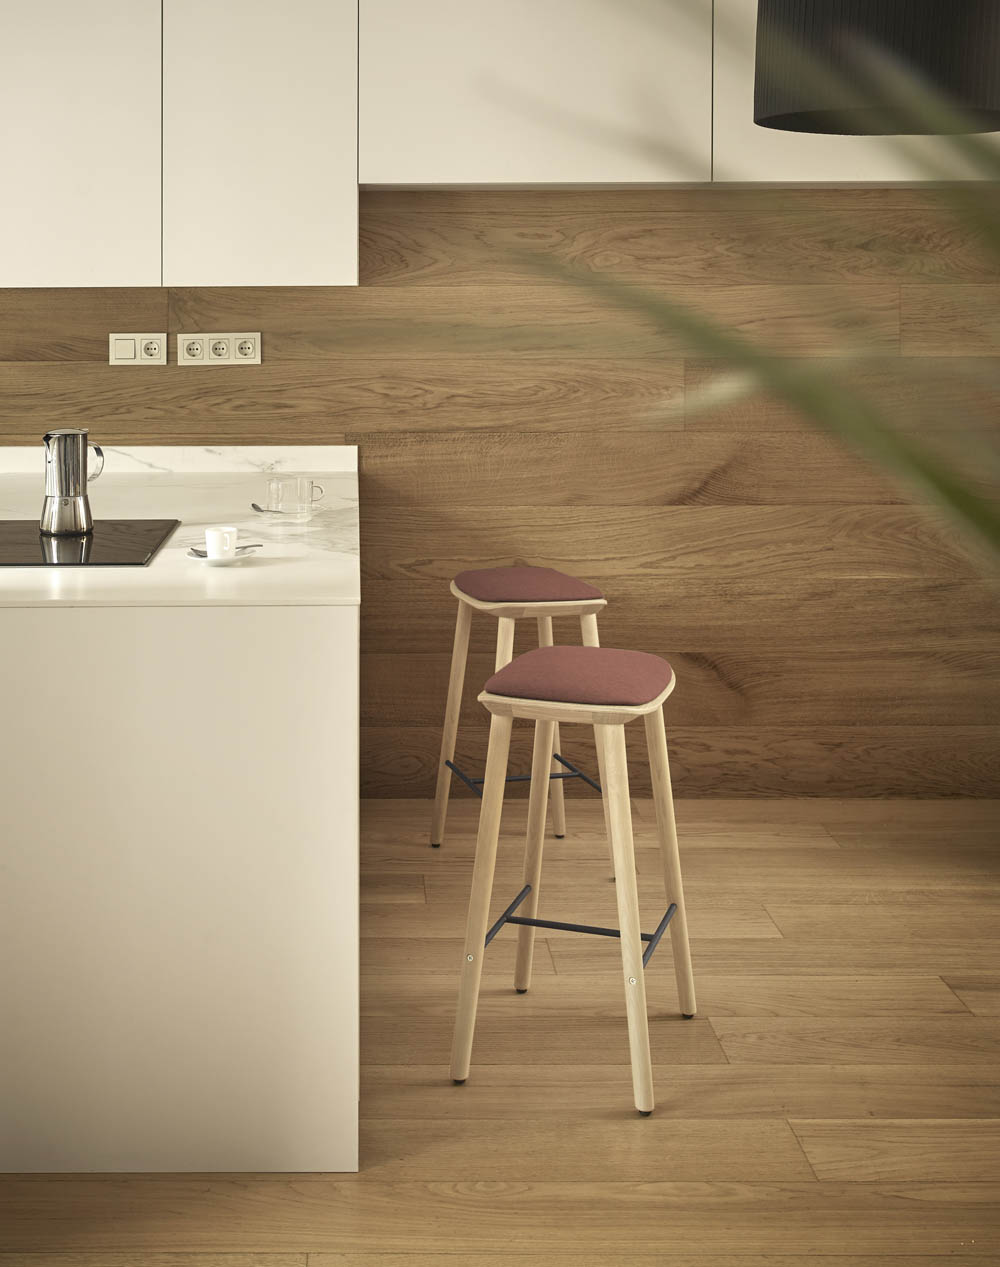 Treku Bisell Stools Natural Oak Leg And Base With Seat Pad In Fusion Crevin Red